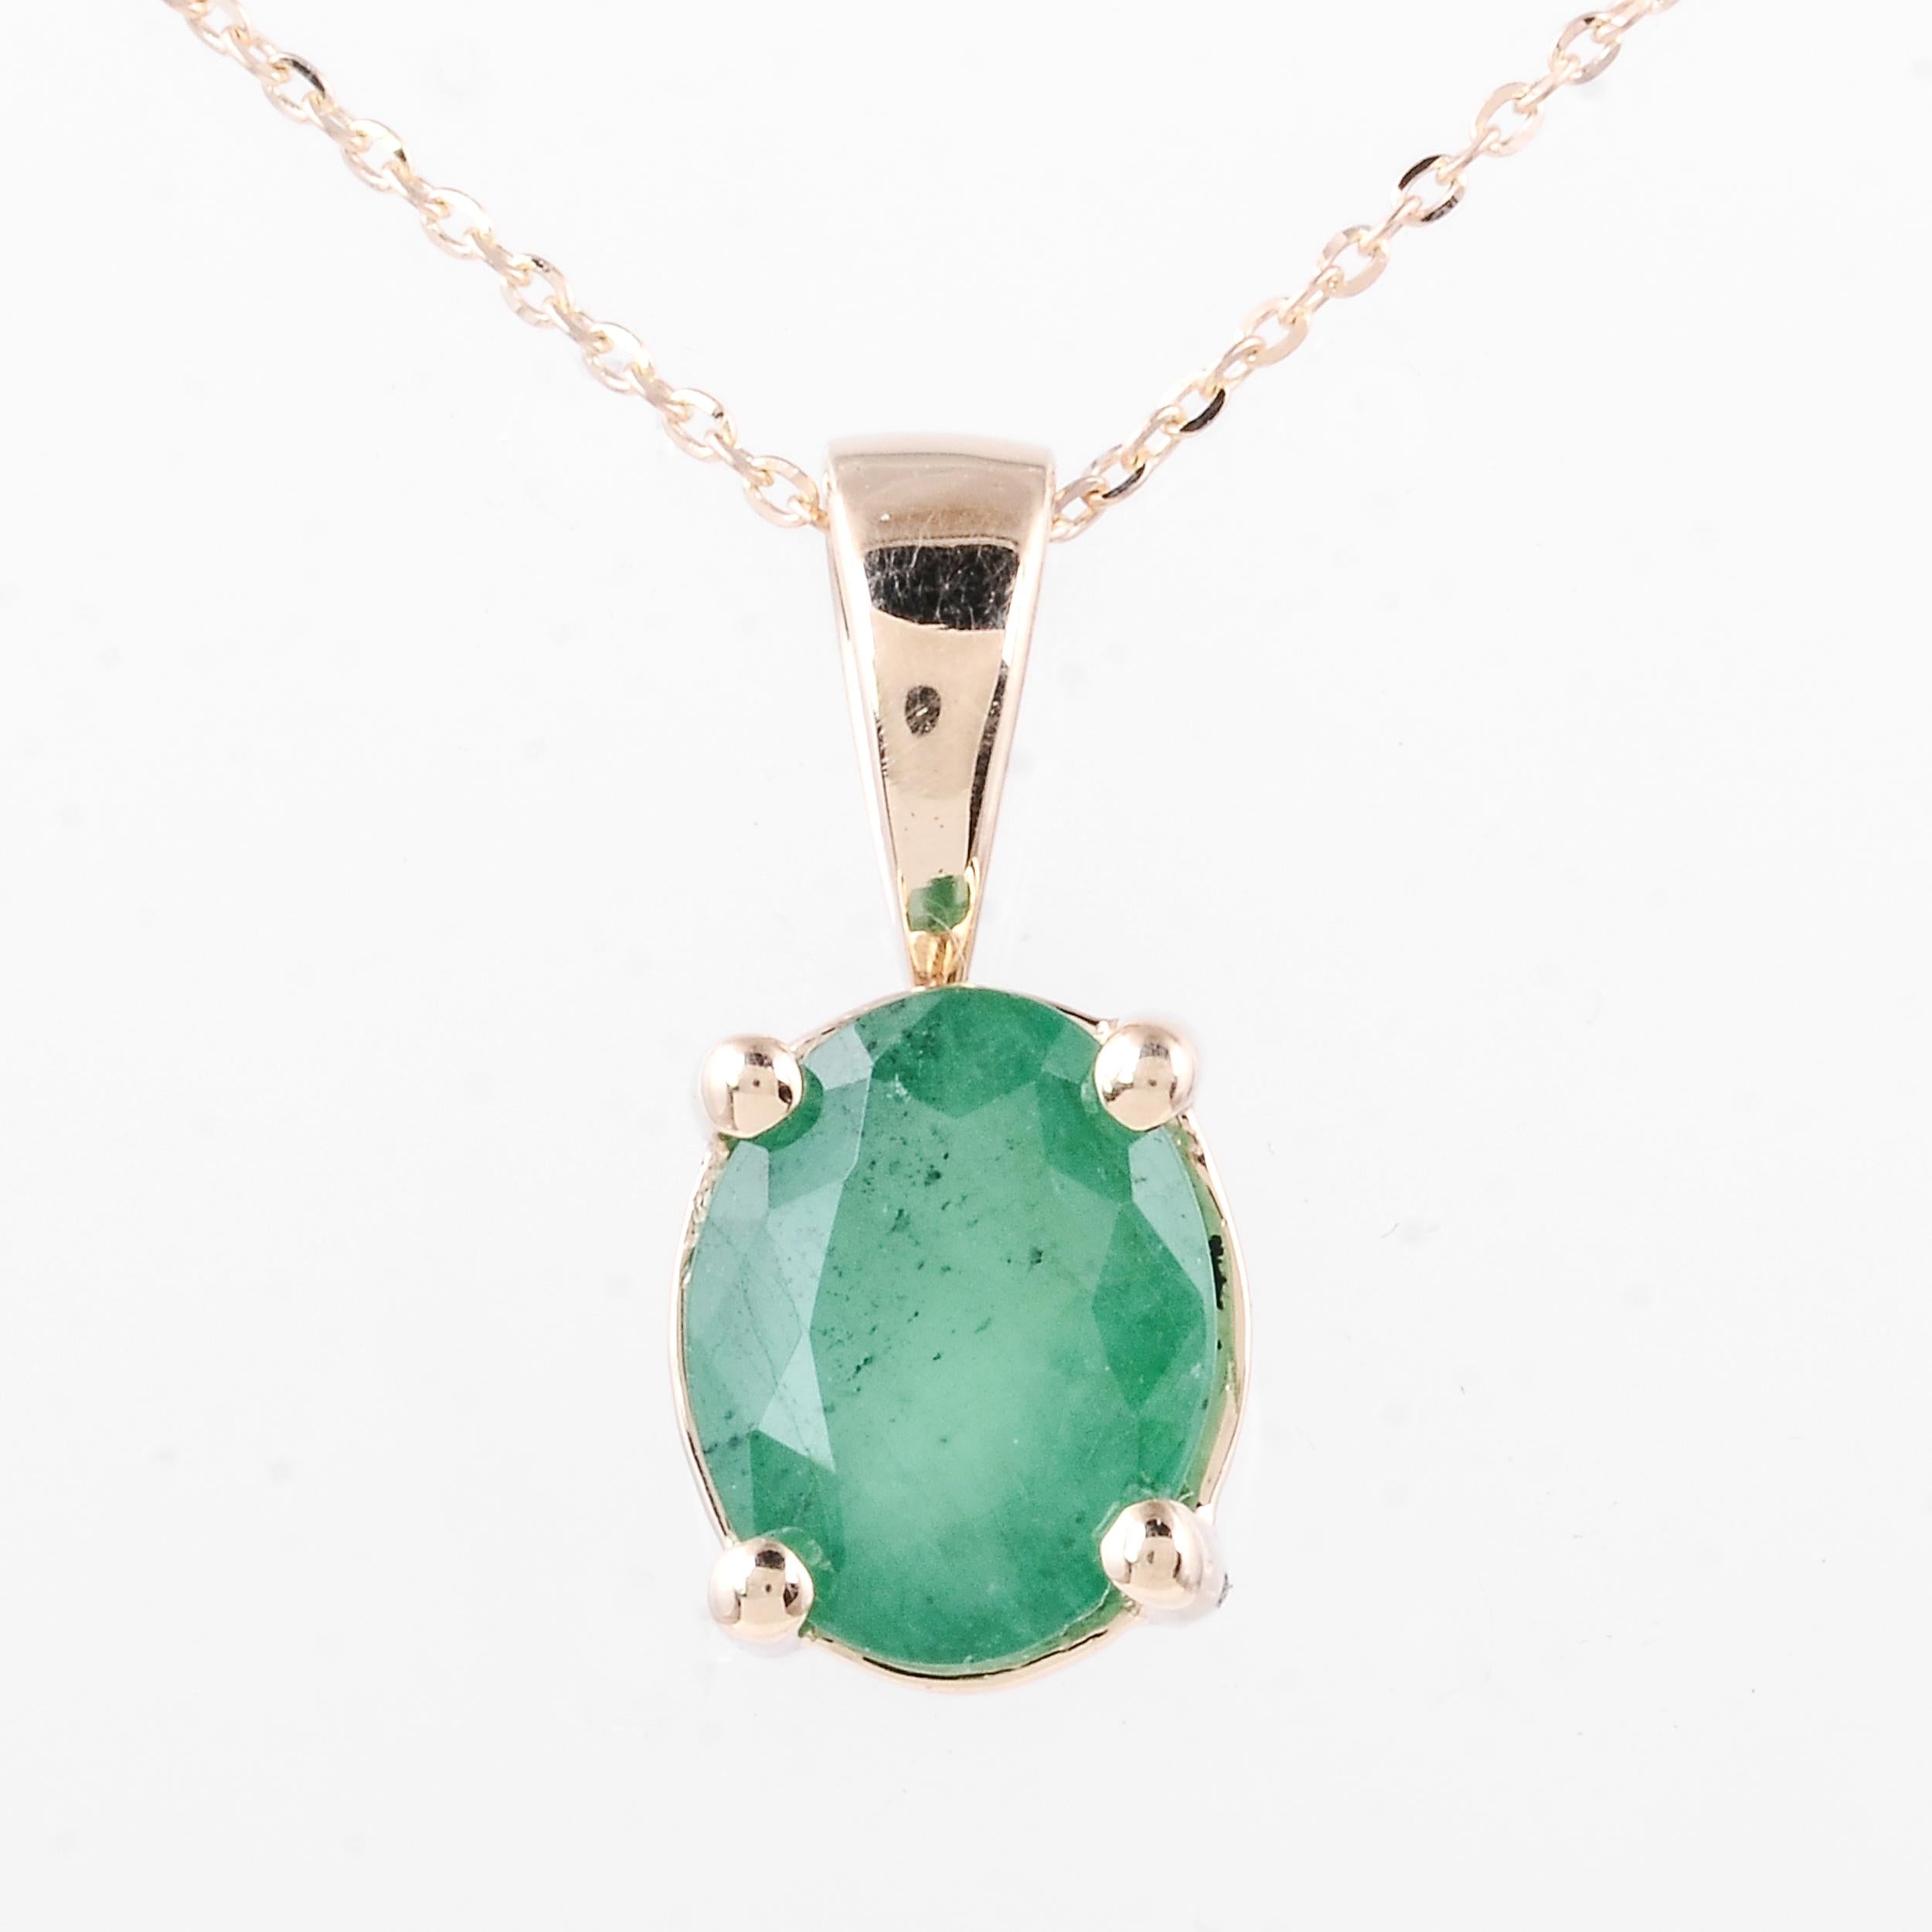 Brilliant Cut 14K Emerald Pendant Necklace 2.33ct - Exquisite Jewelry for Timeless Elegance For Sale